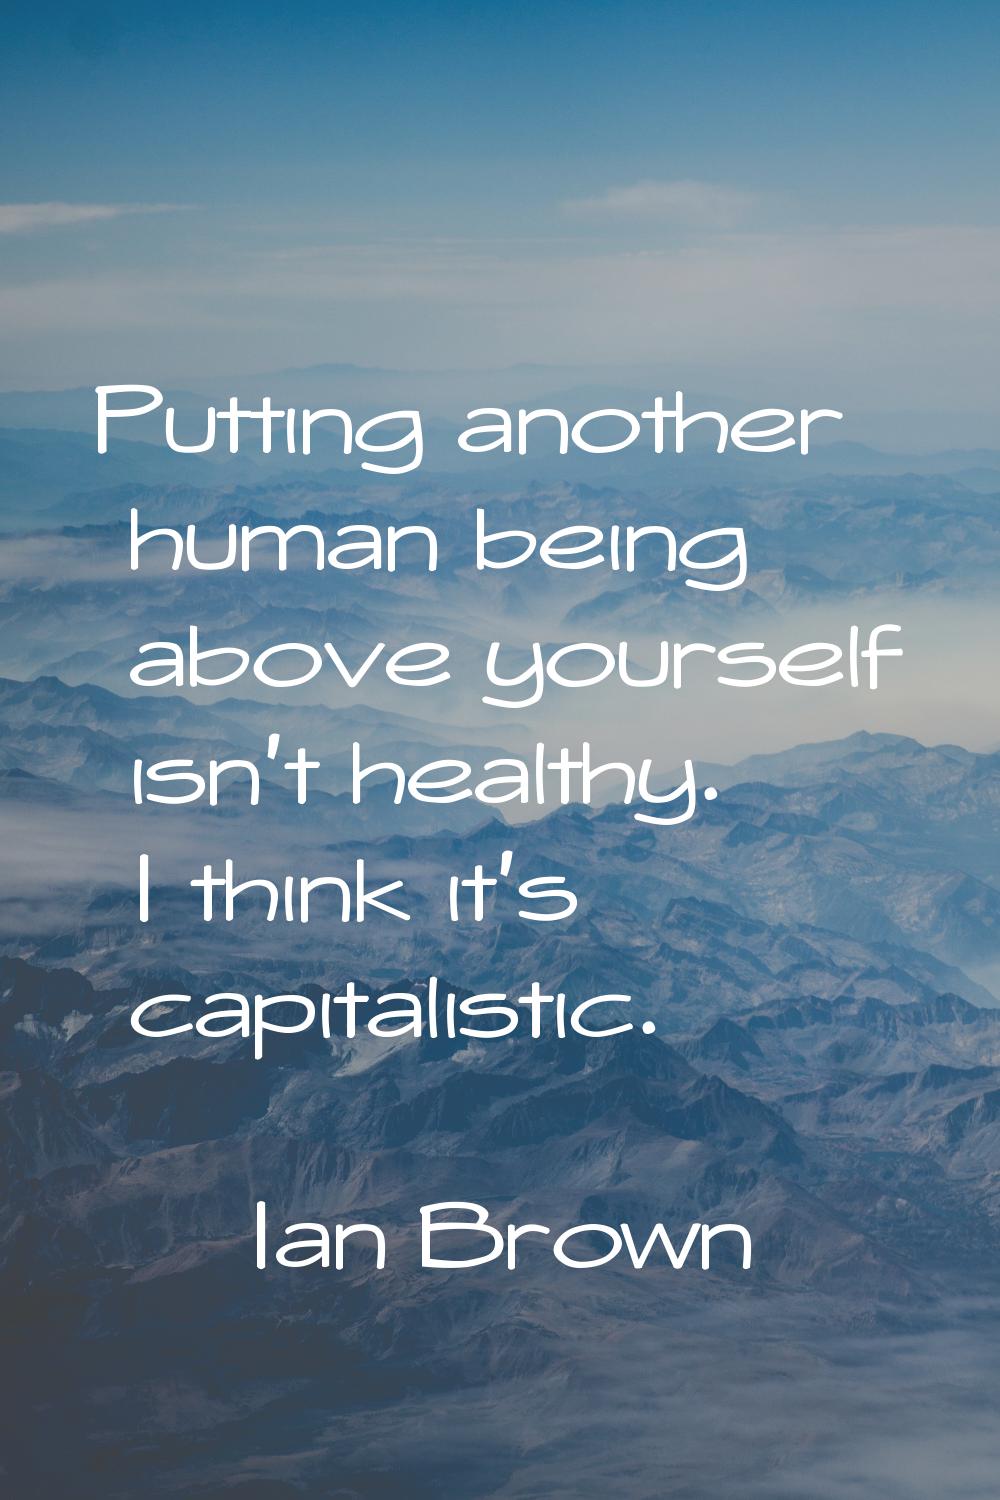 Putting another human being above yourself isn't healthy. I think it's capitalistic.